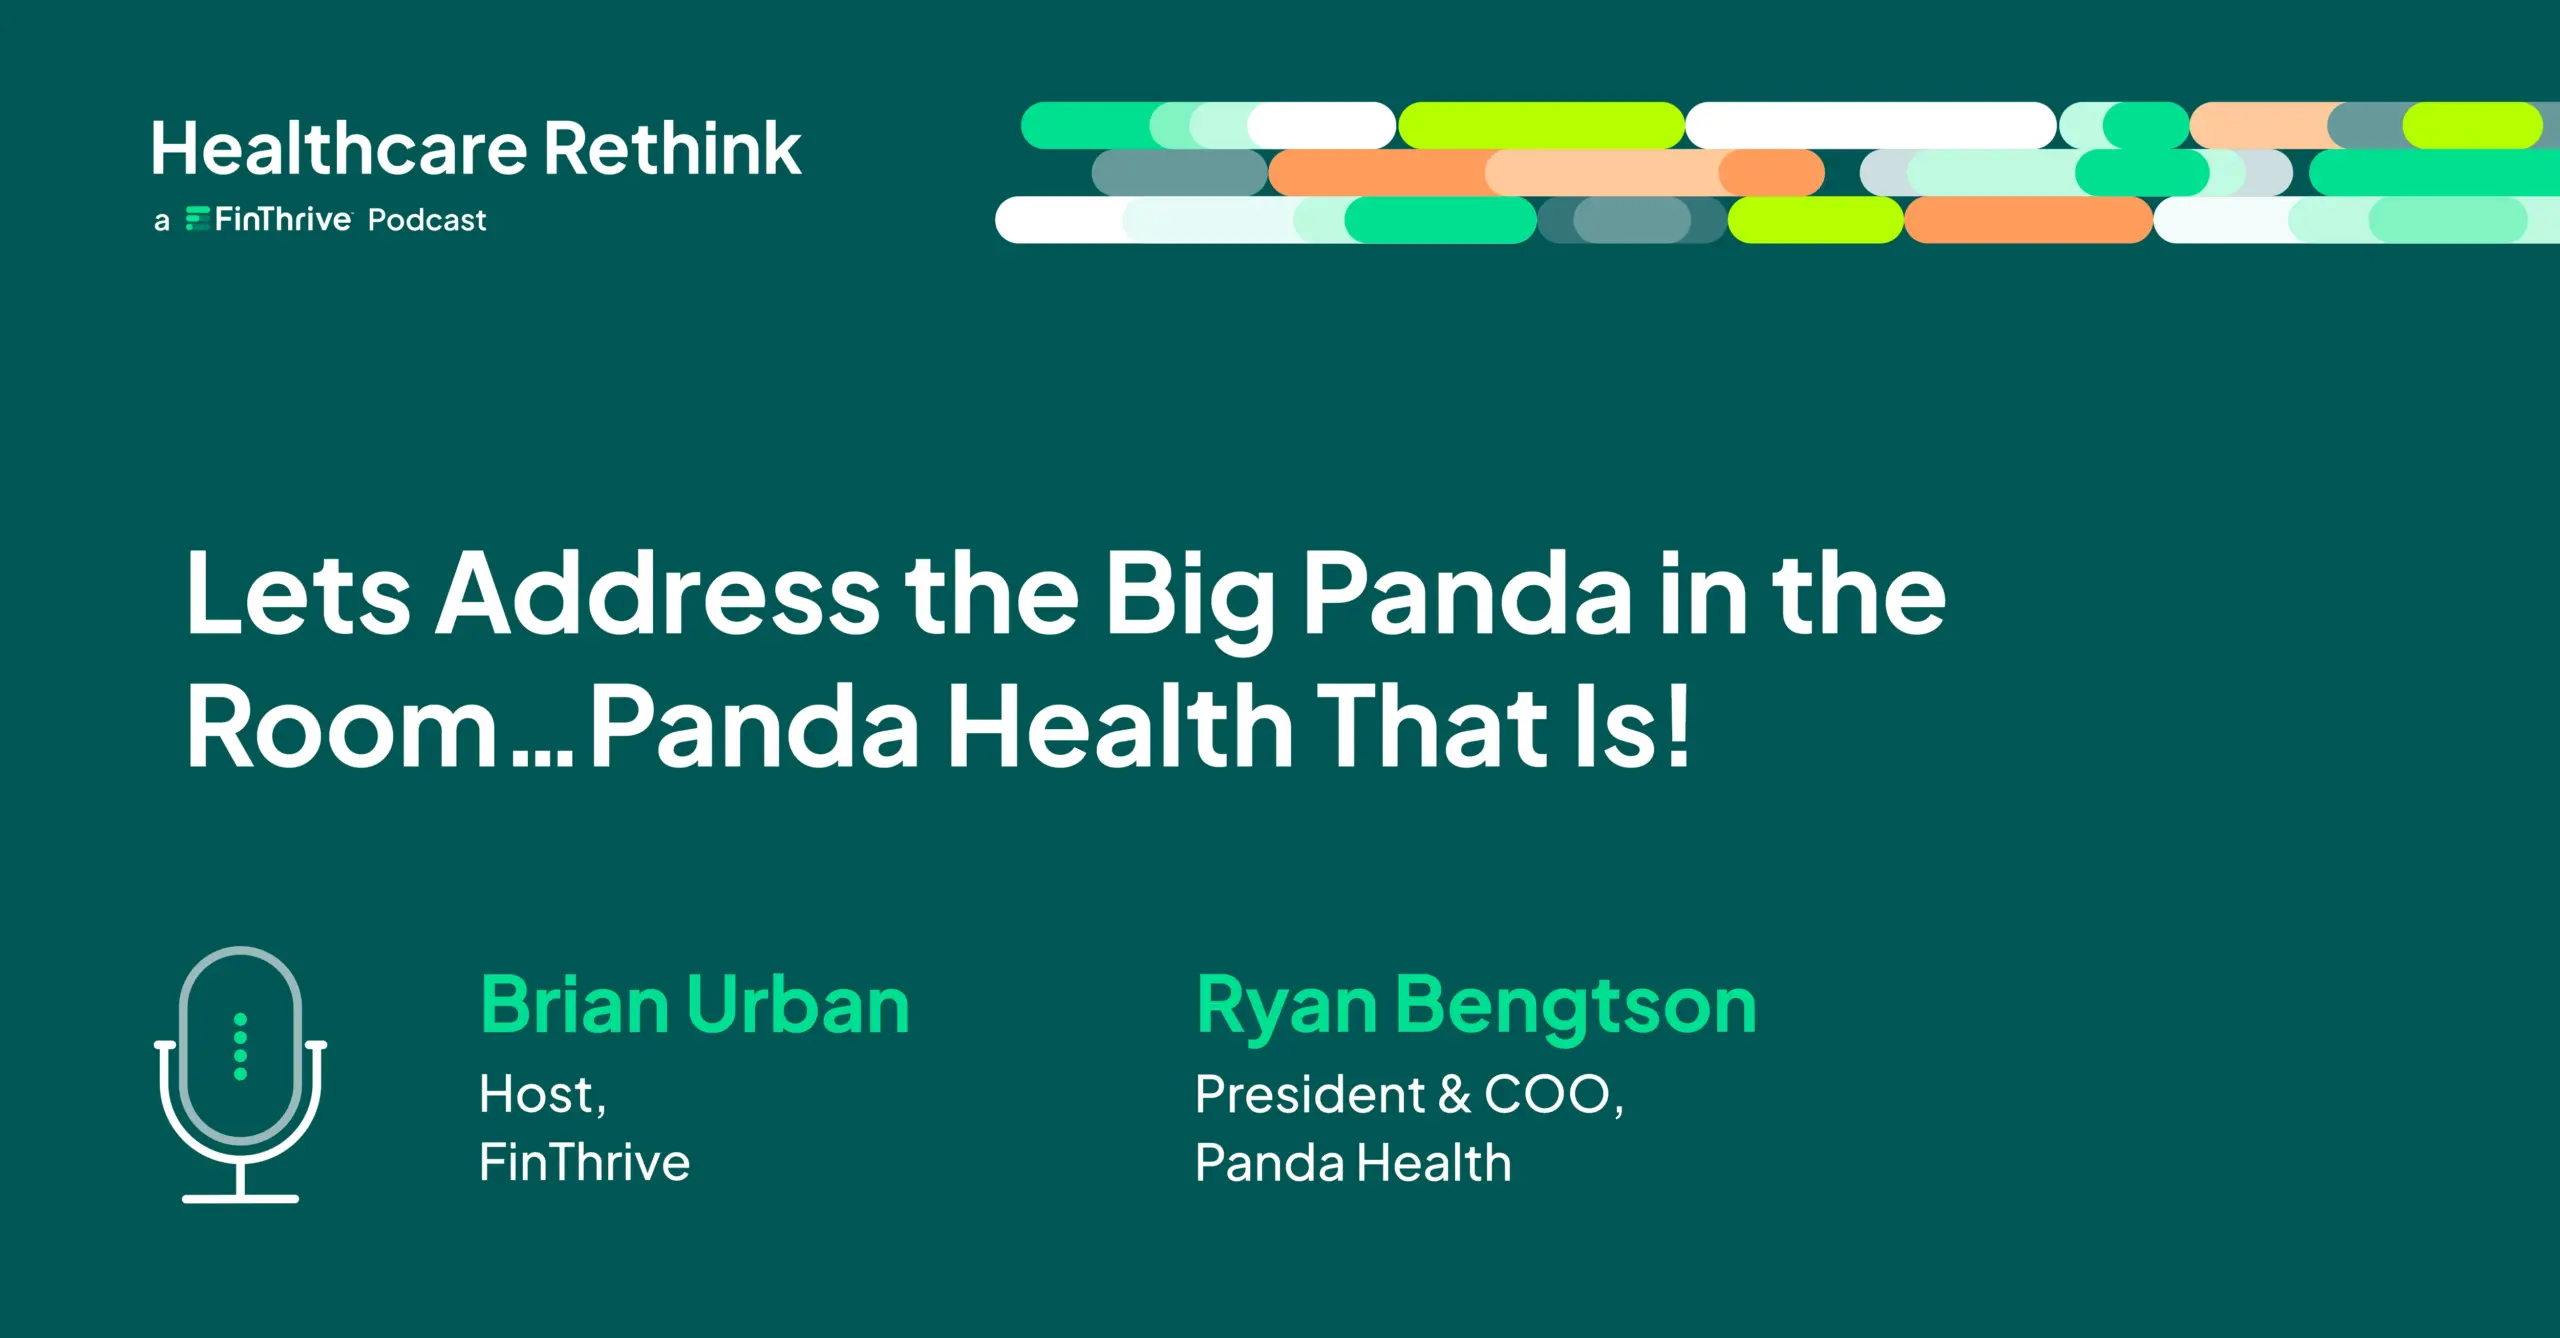 Let’s Address the Big Panda in the Room…Panda Health, That Is!